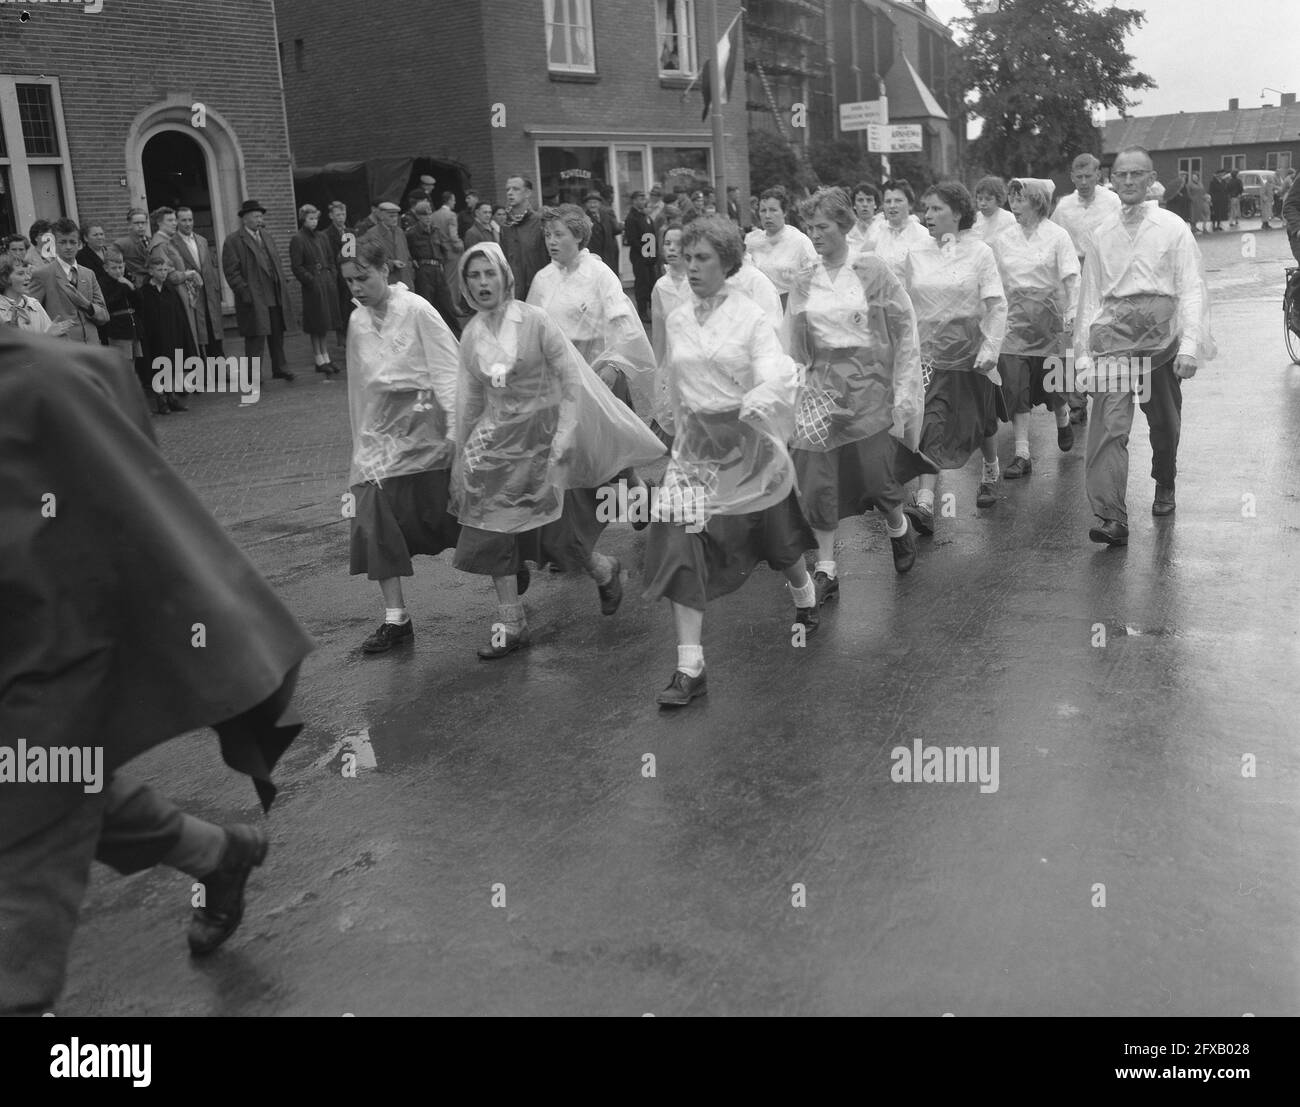 First day of four-day marches Nijmegen. Plastic rainwear, 24 July 1956, VIERDAAGSE, rainwear, The Netherlands, 20th century press agency photo, news to remember, documentary, historic photography 1945-1990, visual stories, human history of the Twentieth Century, capturing moments in time Stock Photo